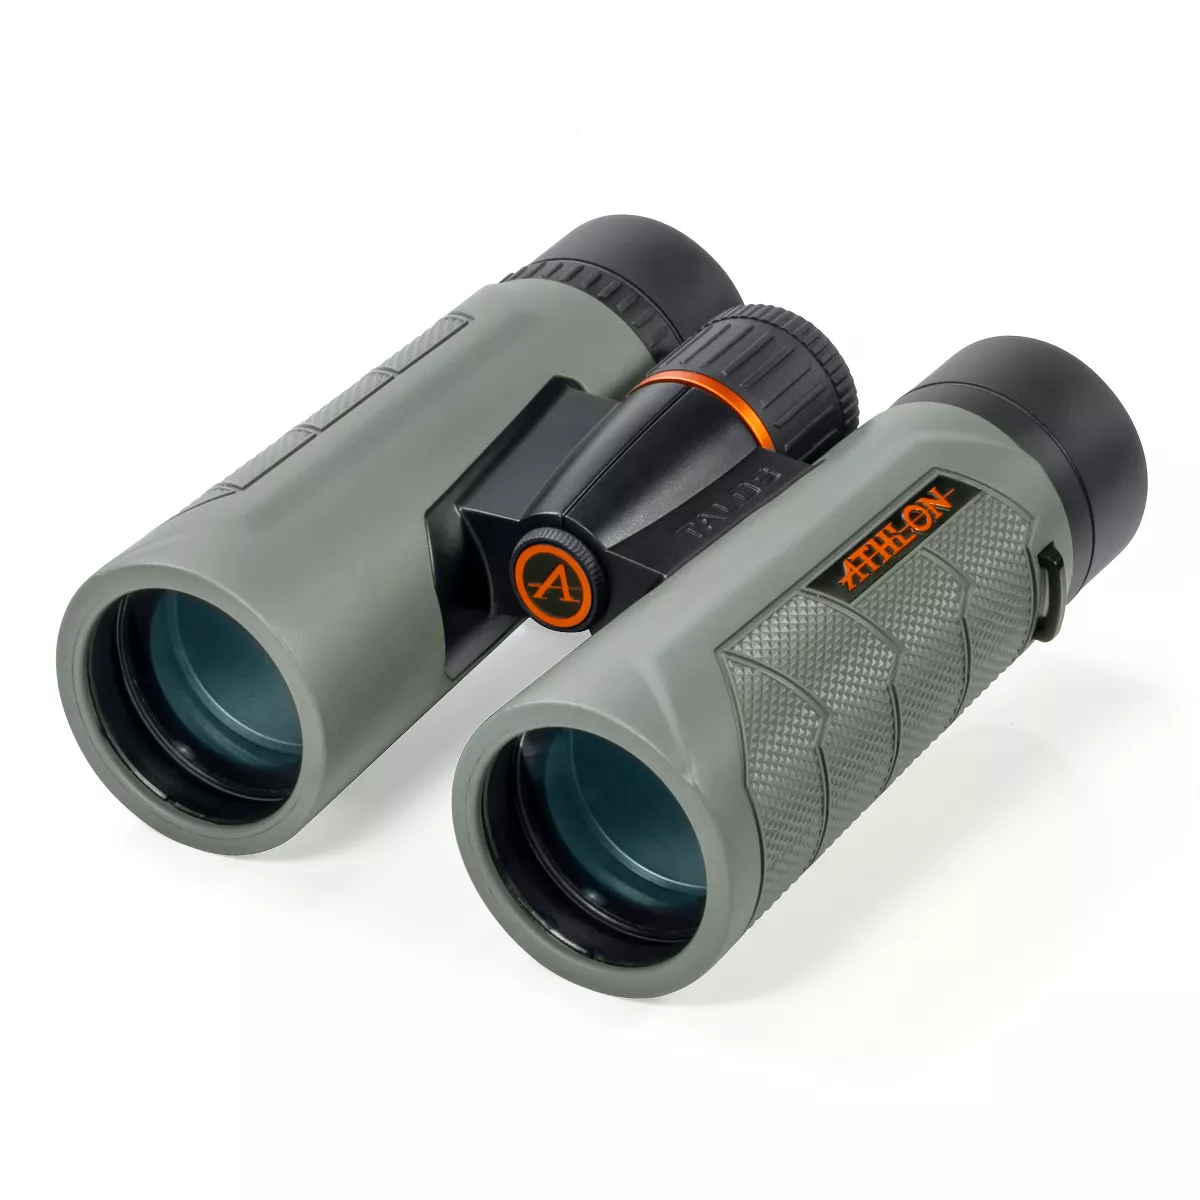 high quality binoculars - best christmas gifts for parents 